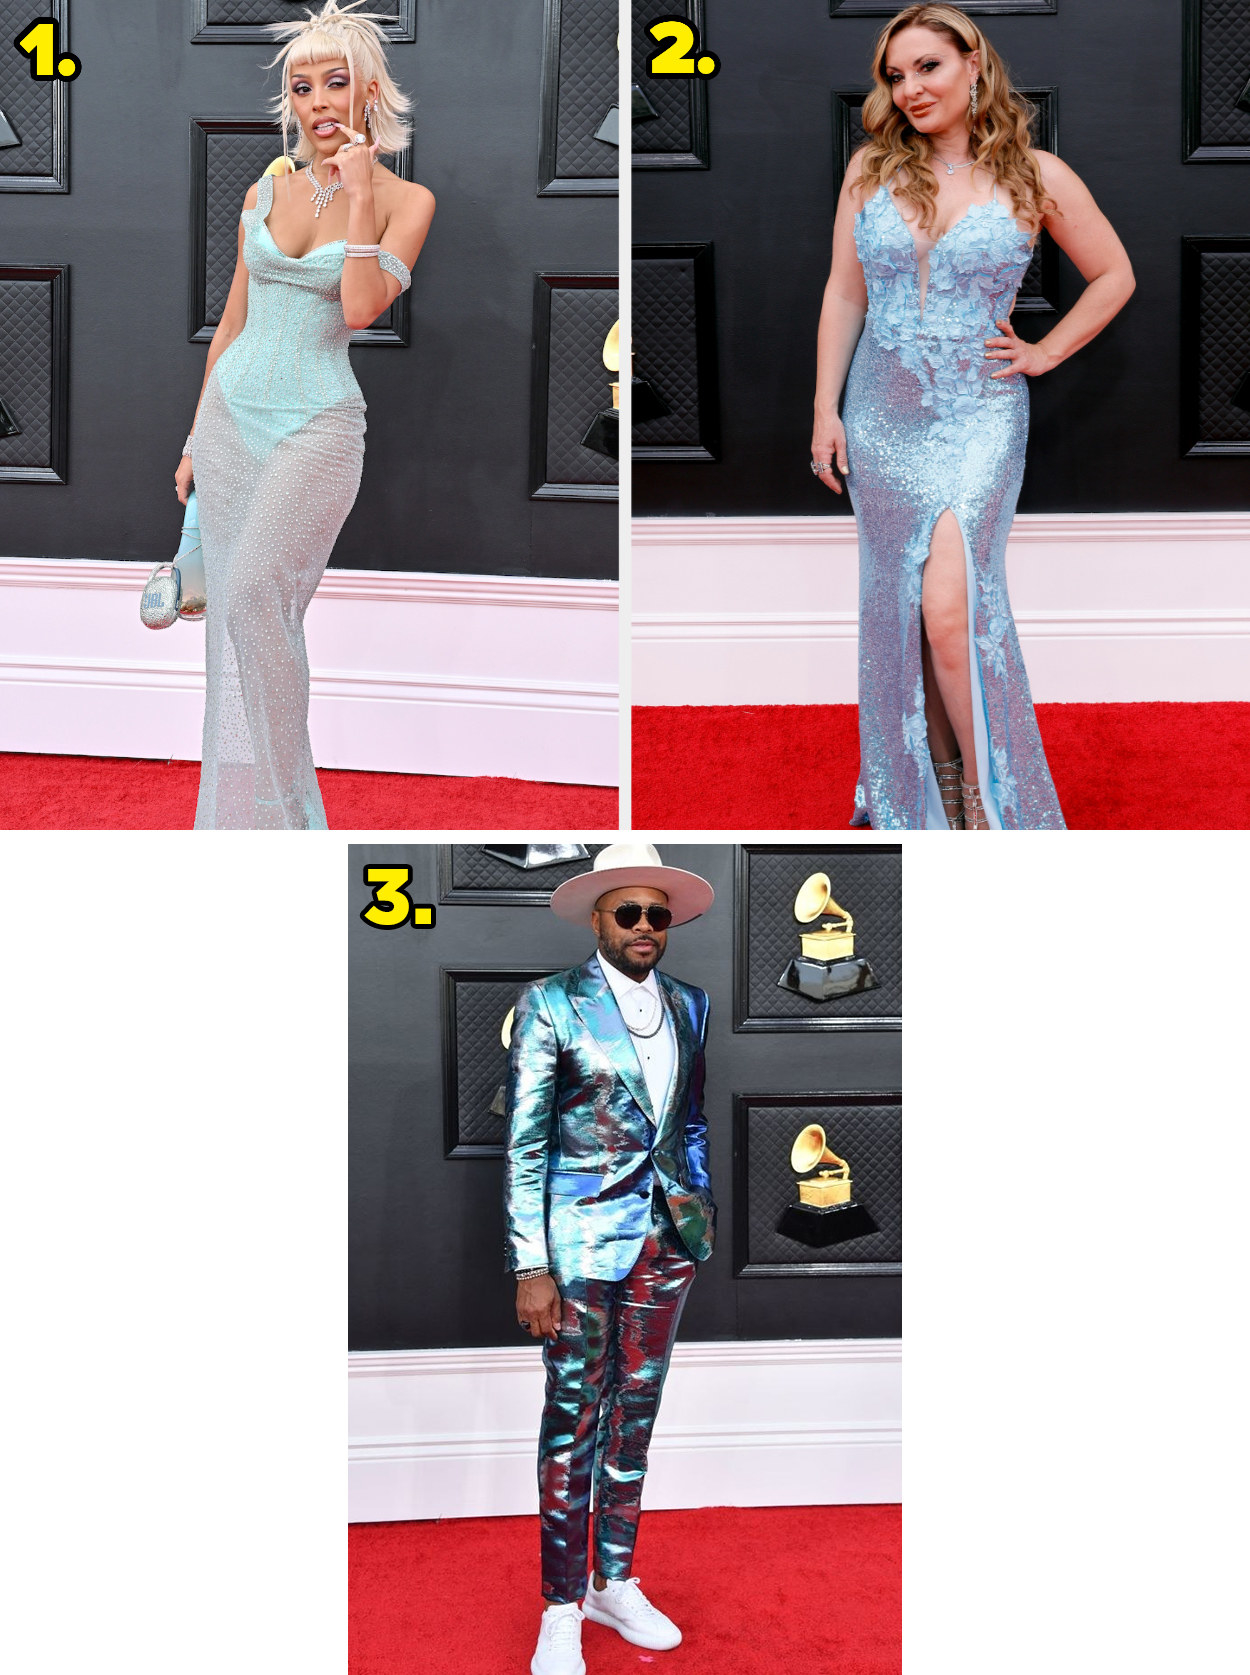 1. An off-the-shoulder gown with a corset and a sheer skirt. 2. A strapless gown with flower appliqués and a huge thigh slit. 3. A very shiny printed suit.